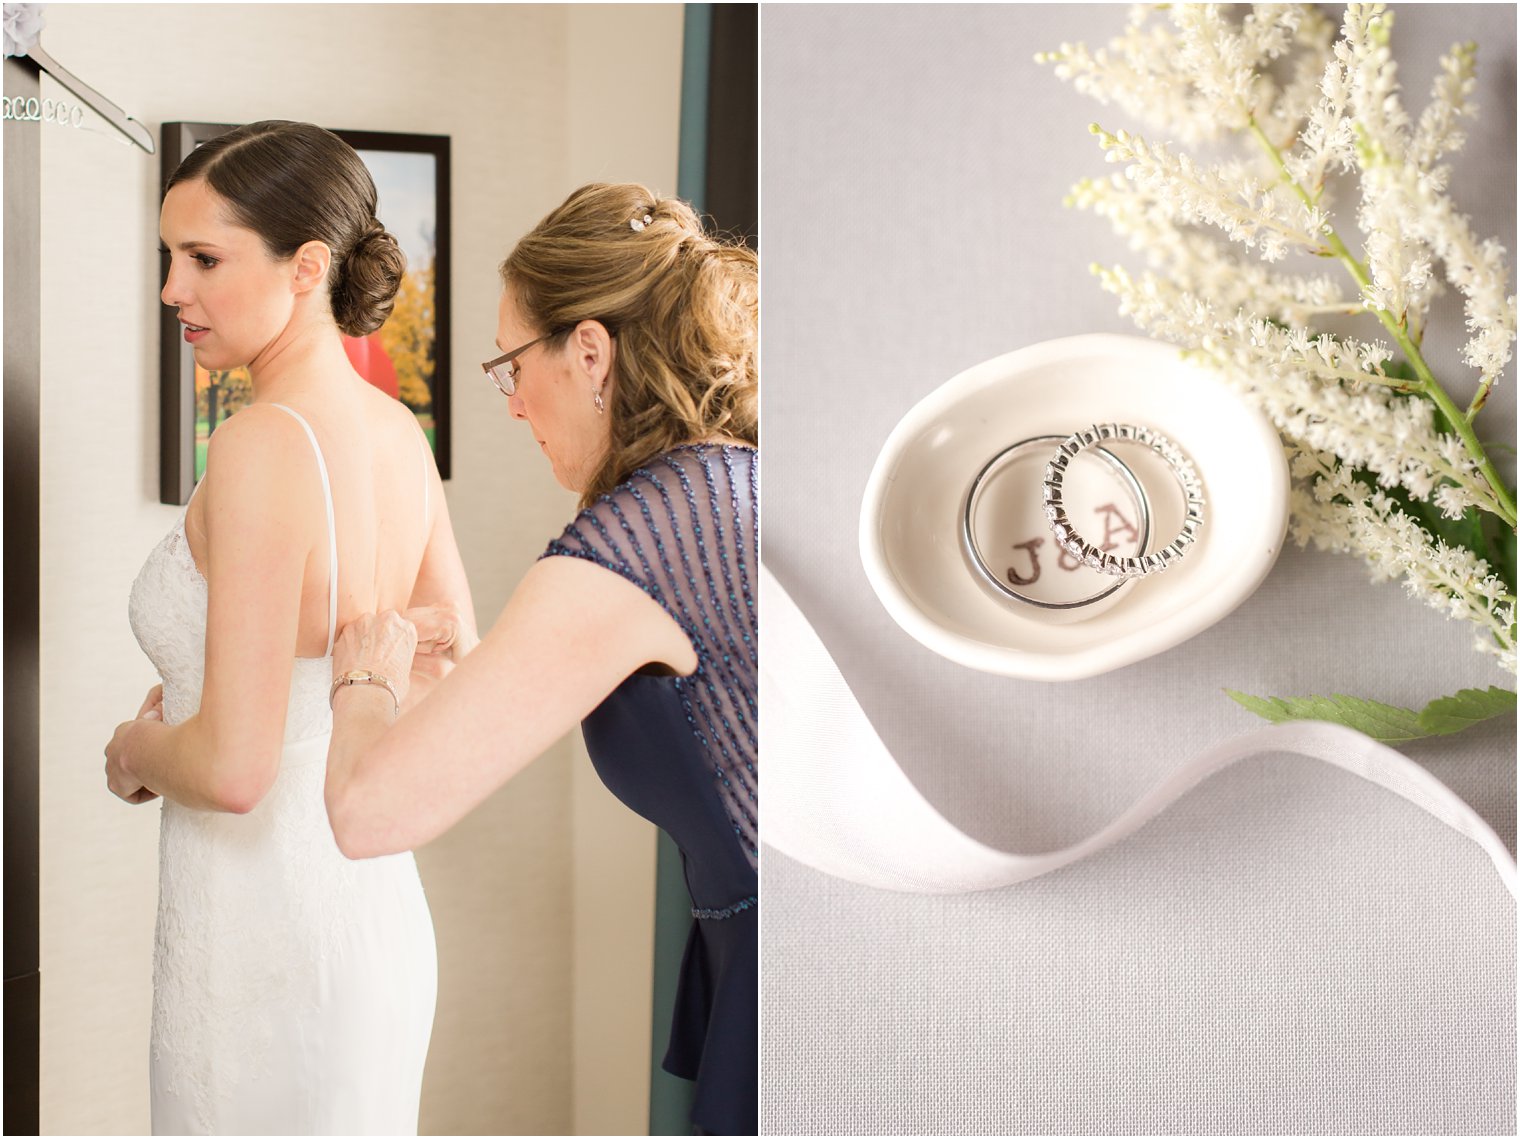 Mother helping bride into her dress | Photos by Idalia Photography